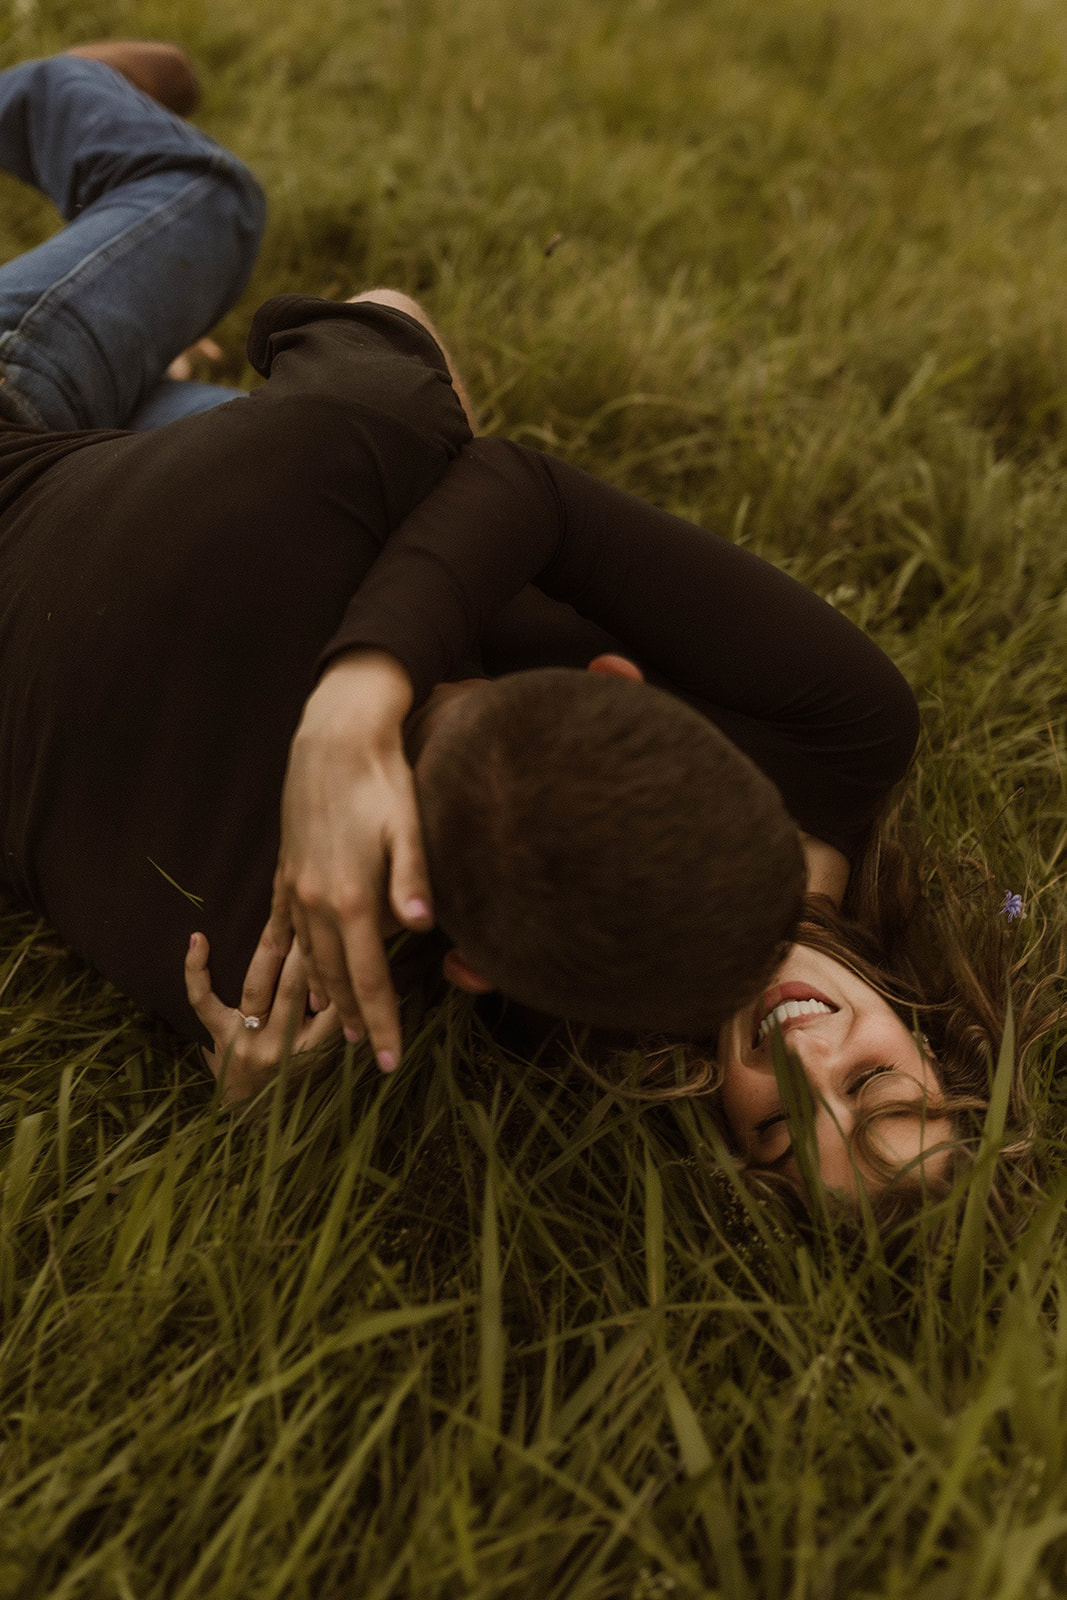 Beautiful couple pose together laying in a wildflower field 